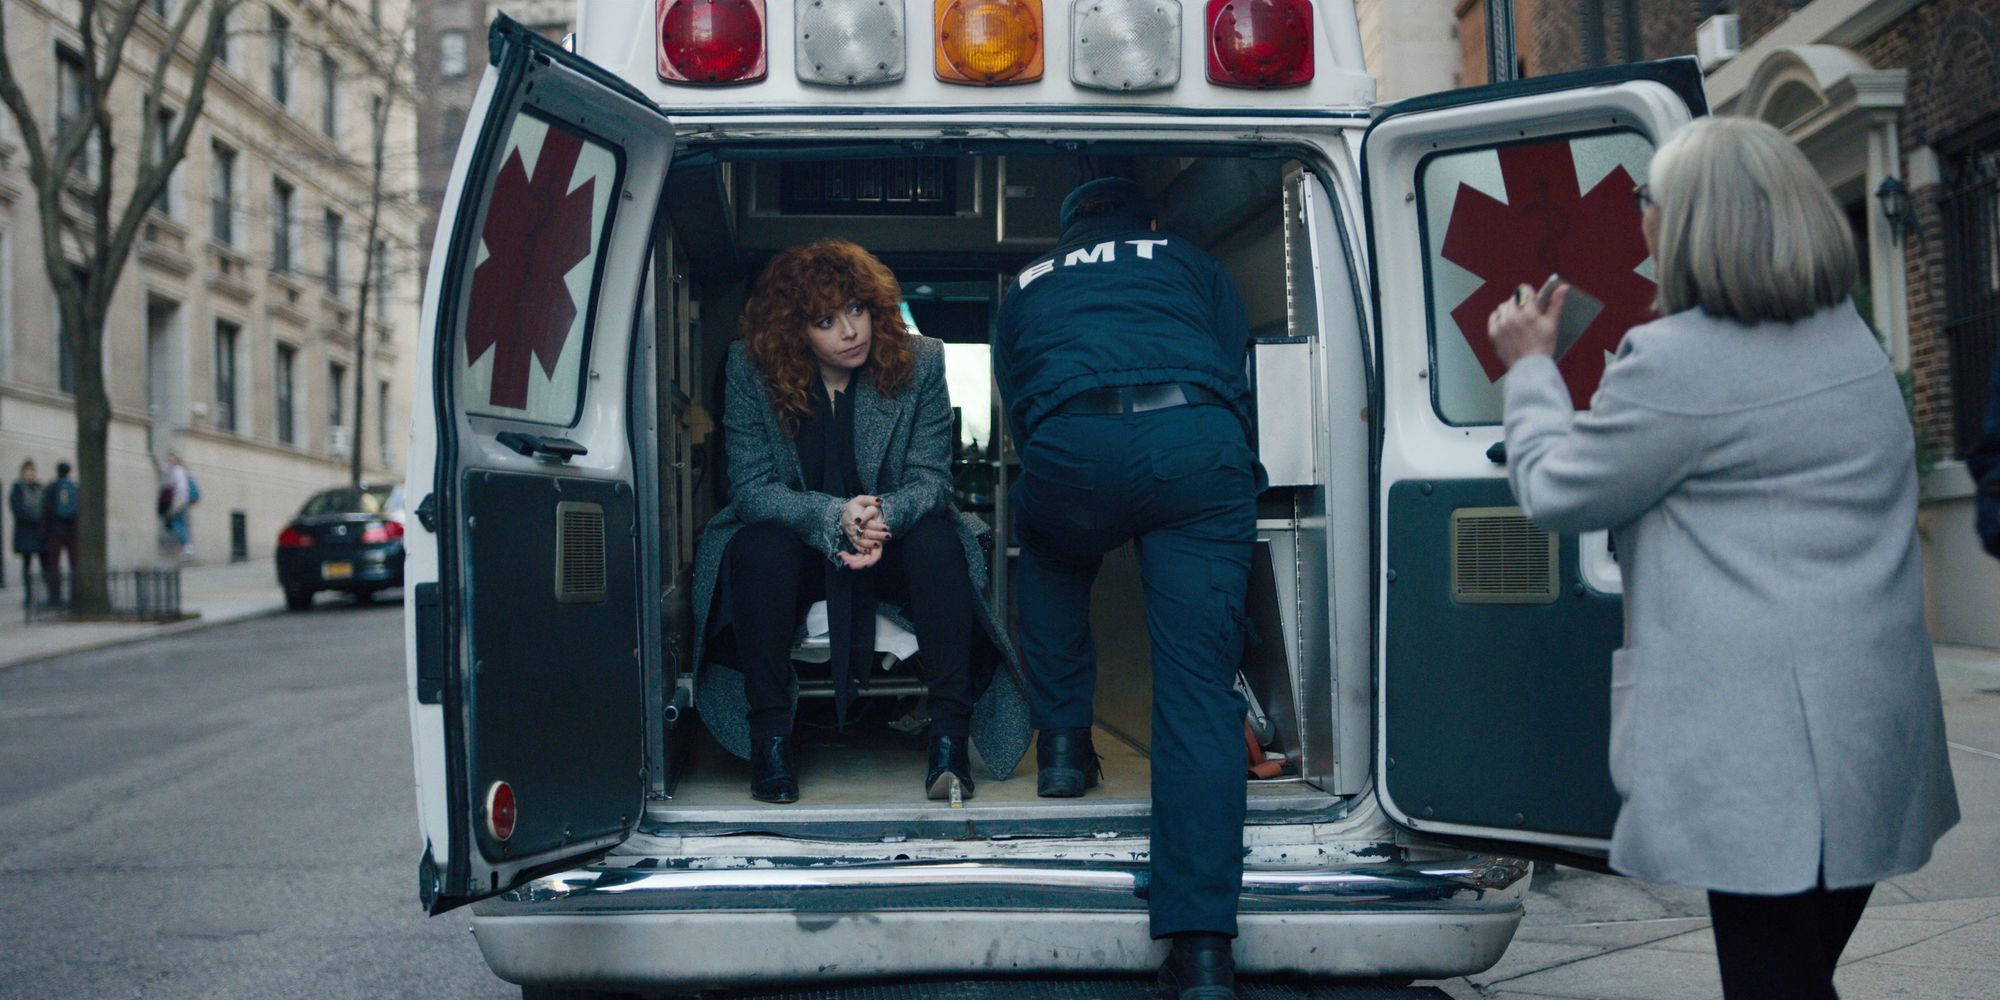 What To Expect From Russian Doll Season 2